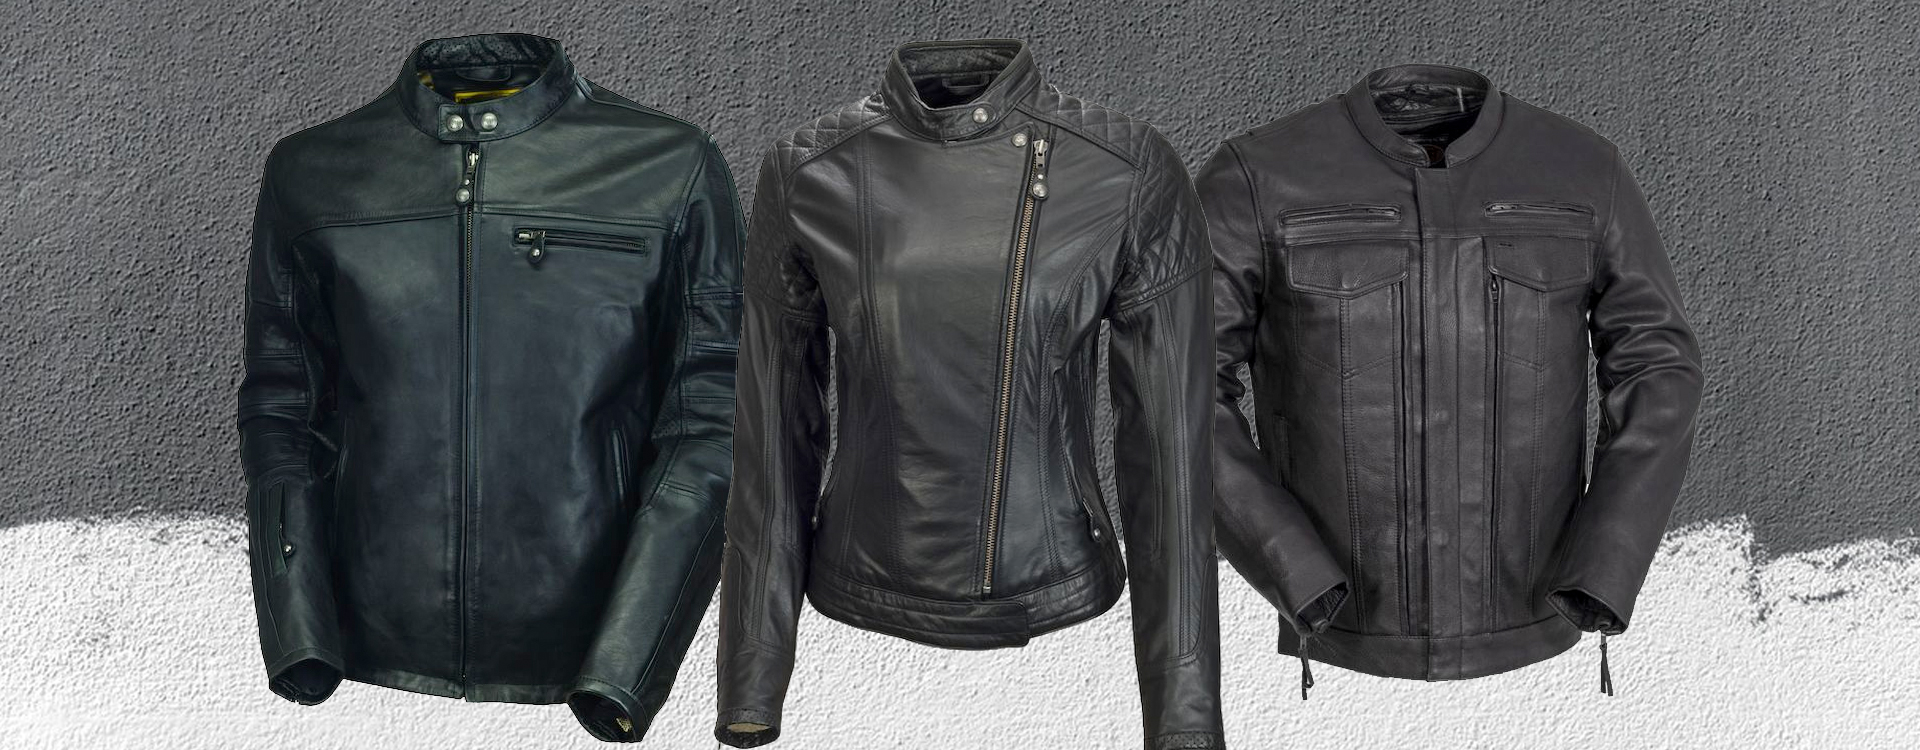 Best Leather Motorcycle Jackets 2021, Best Leather For Motorcycle Jackets